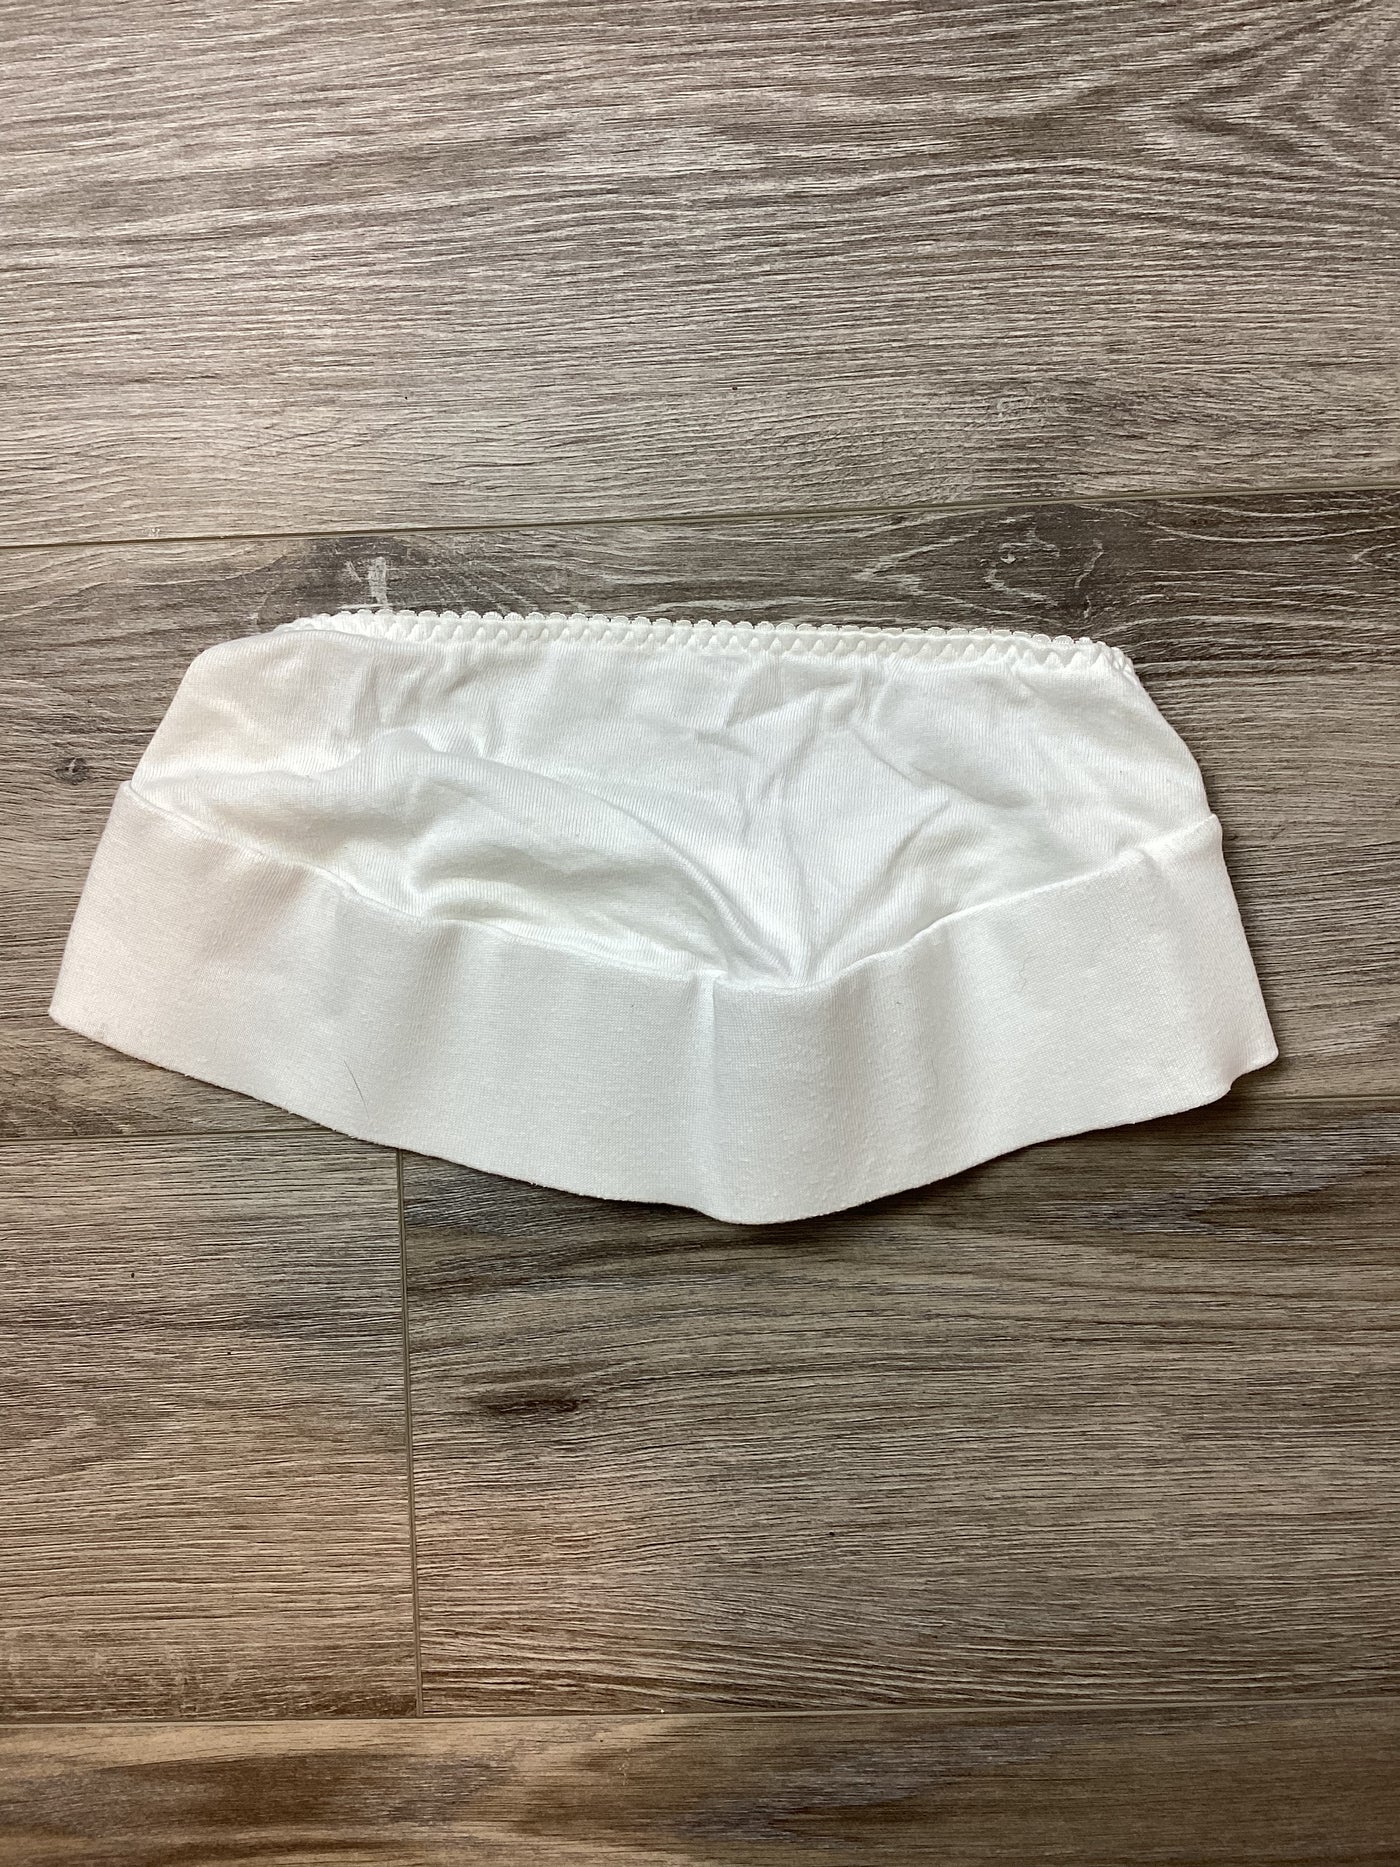 Blooming Marvellous White Maternity Support Belt - Size S (Approx UK 8-10)